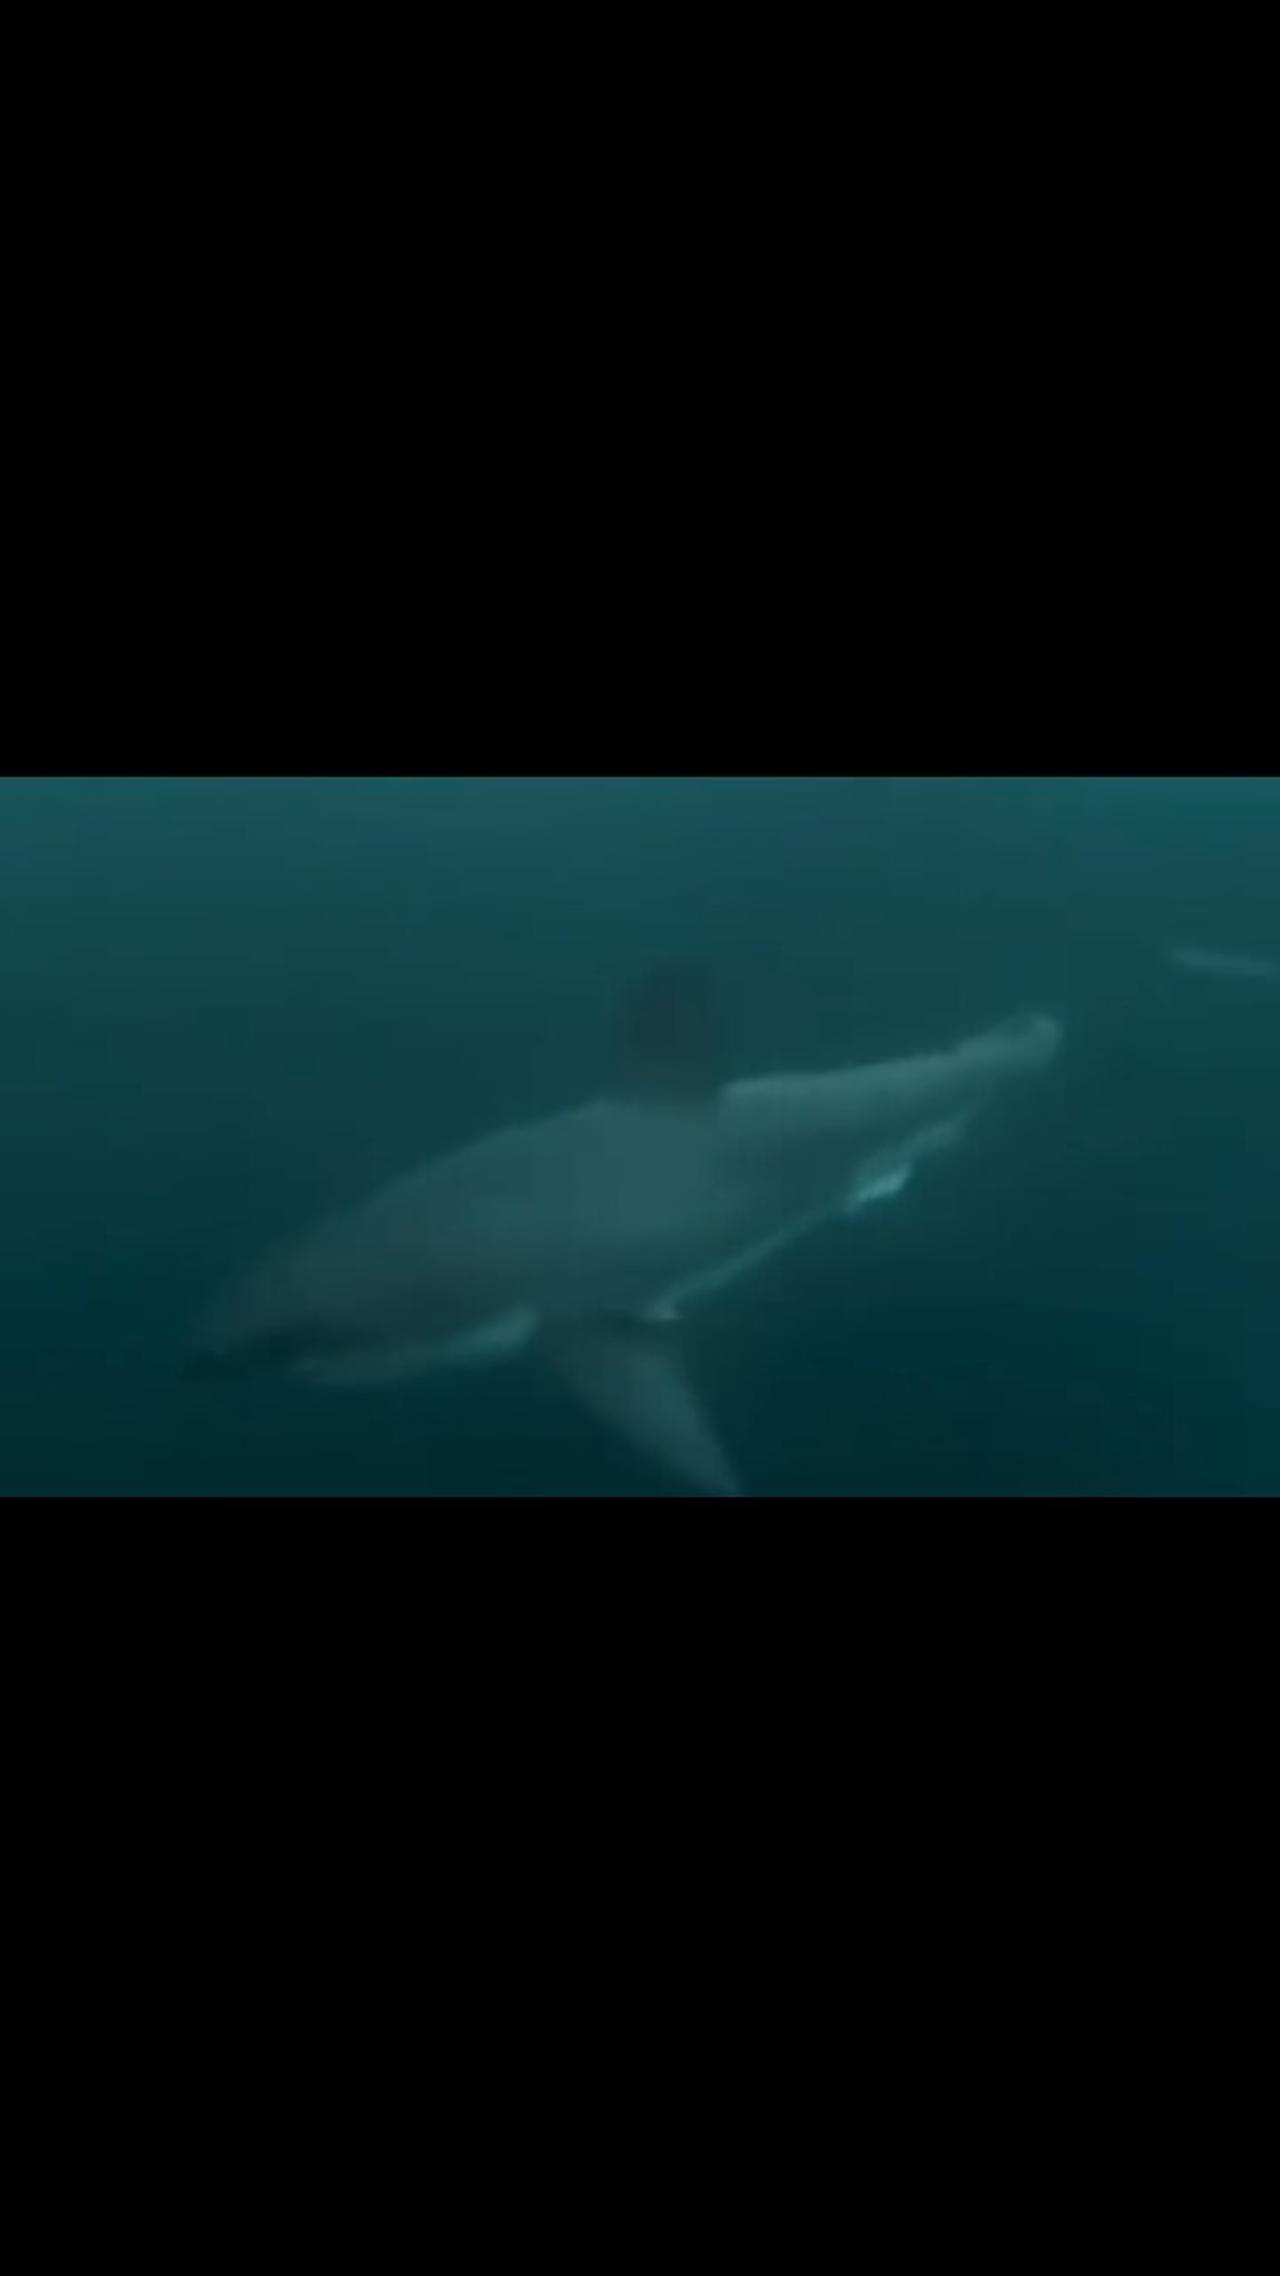 Great White Shark Encounter While Swimming